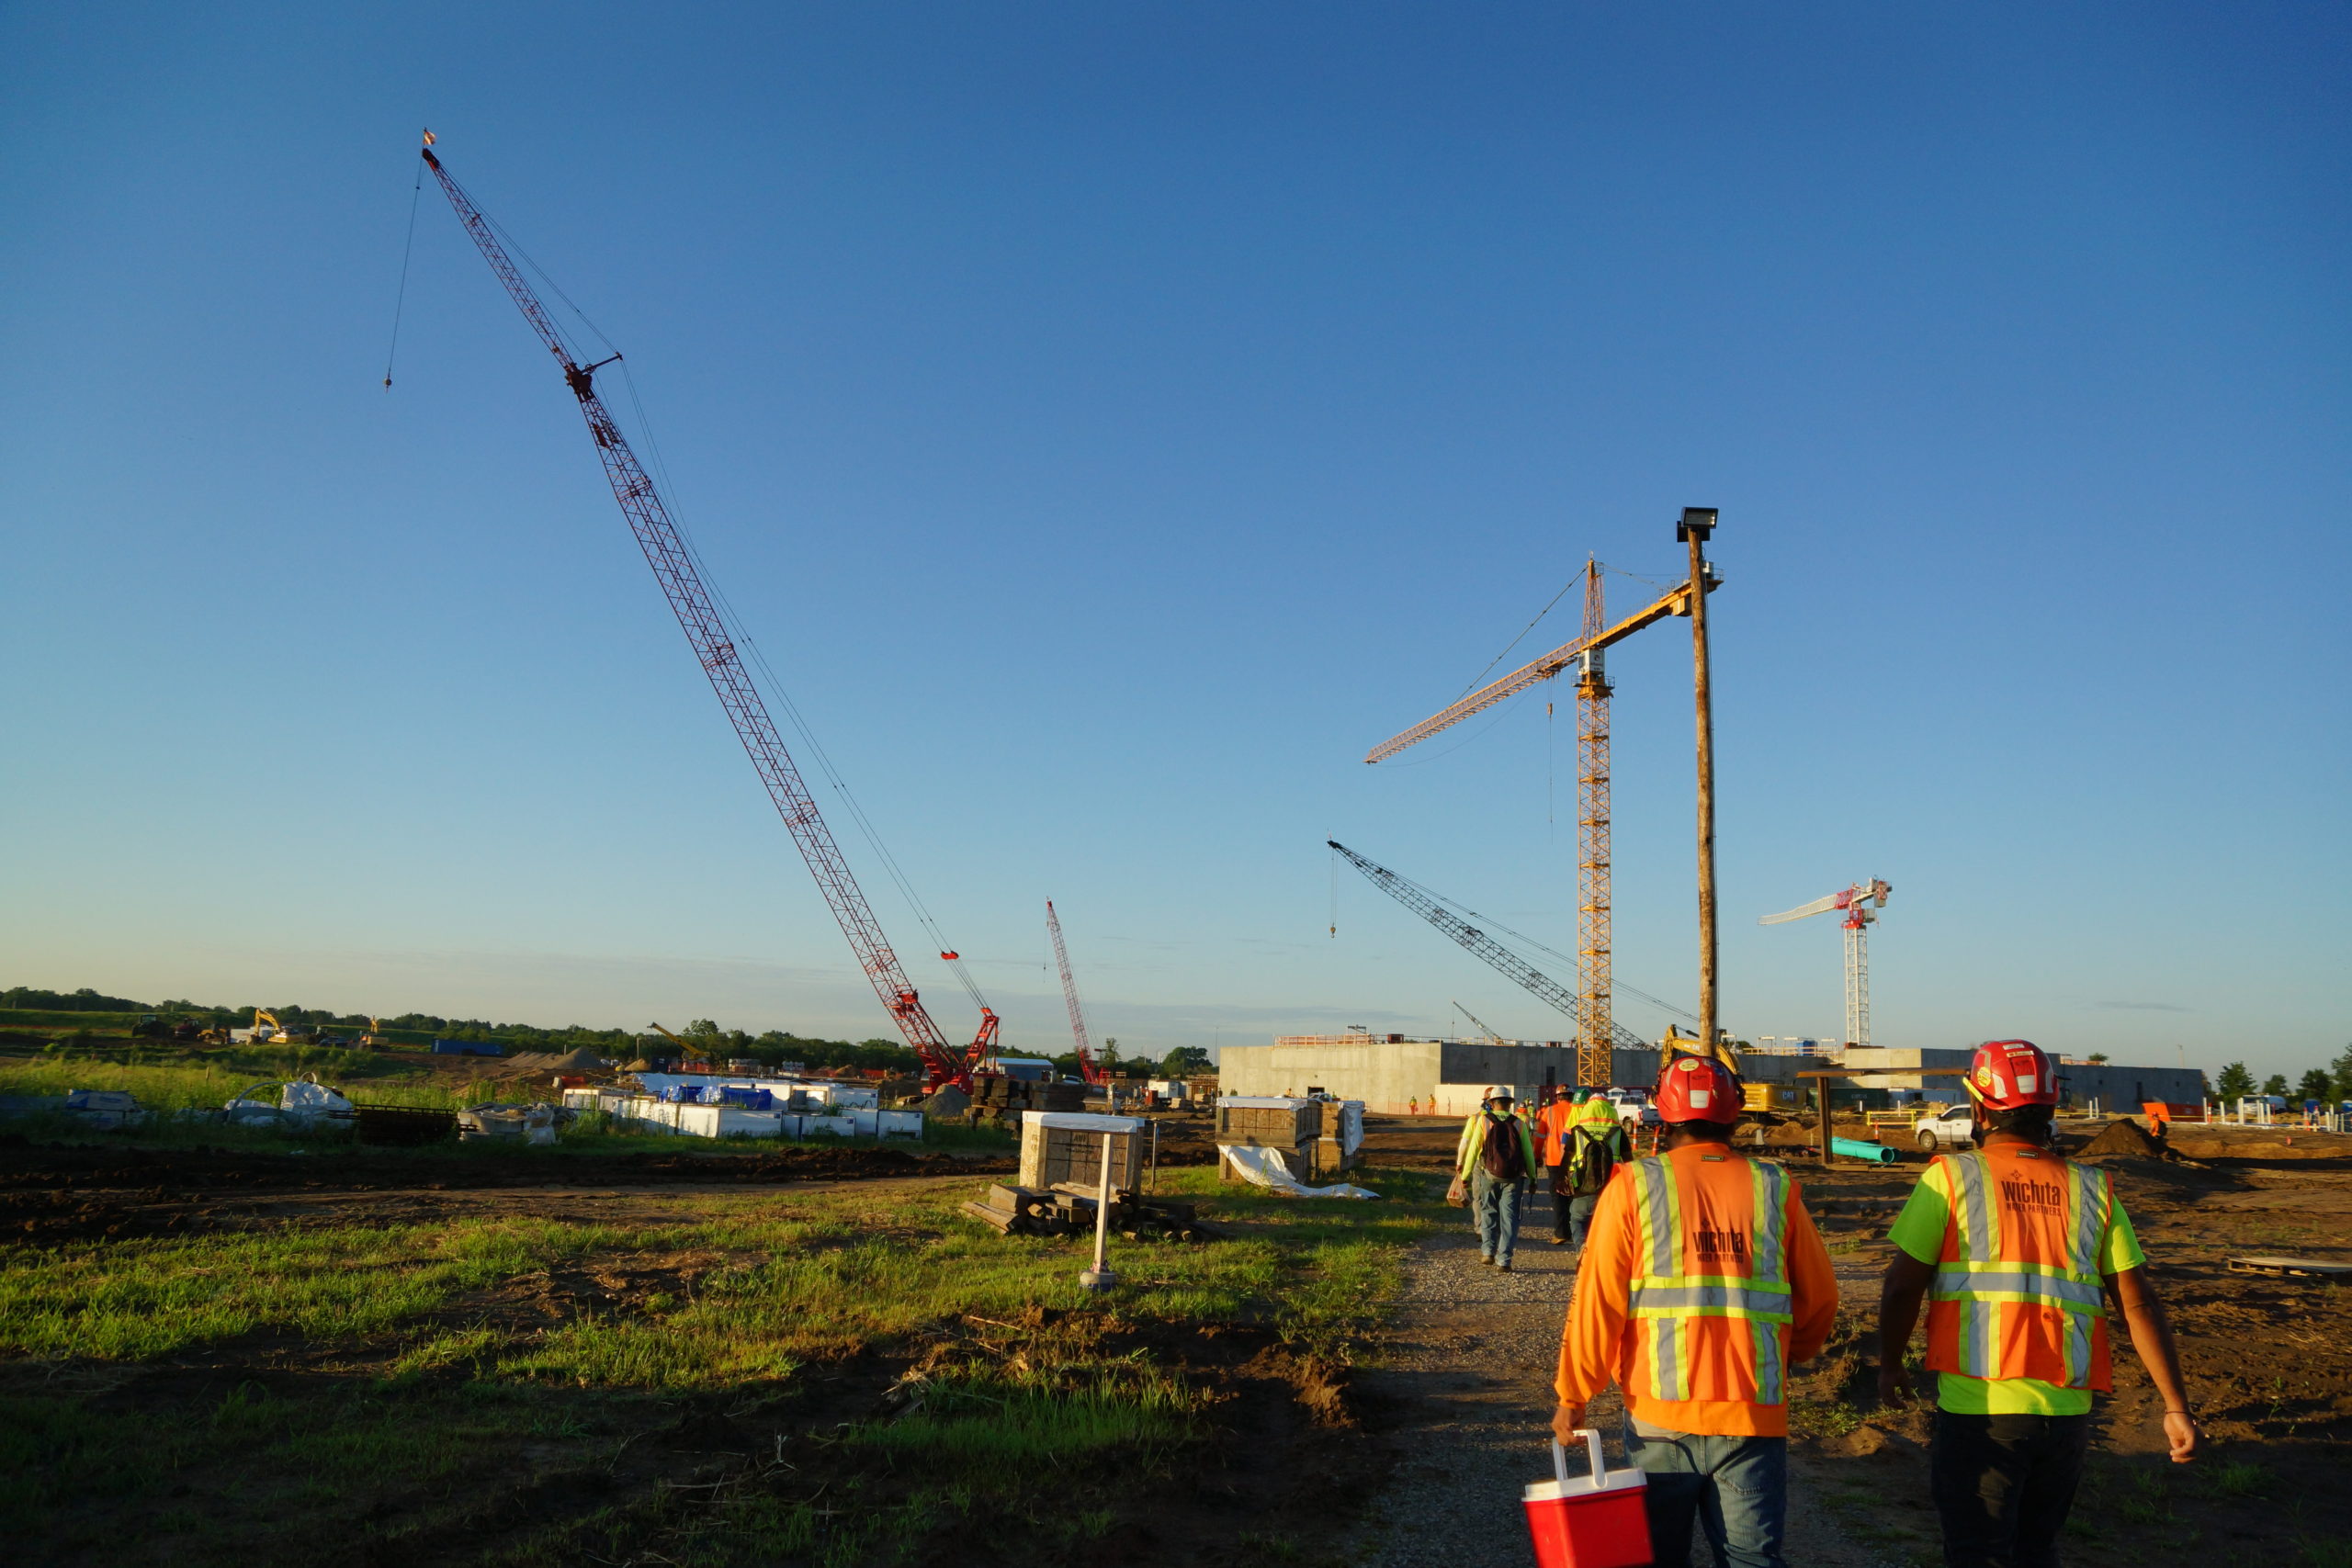 Tower cranes on site at Wichita's NW Water Facility